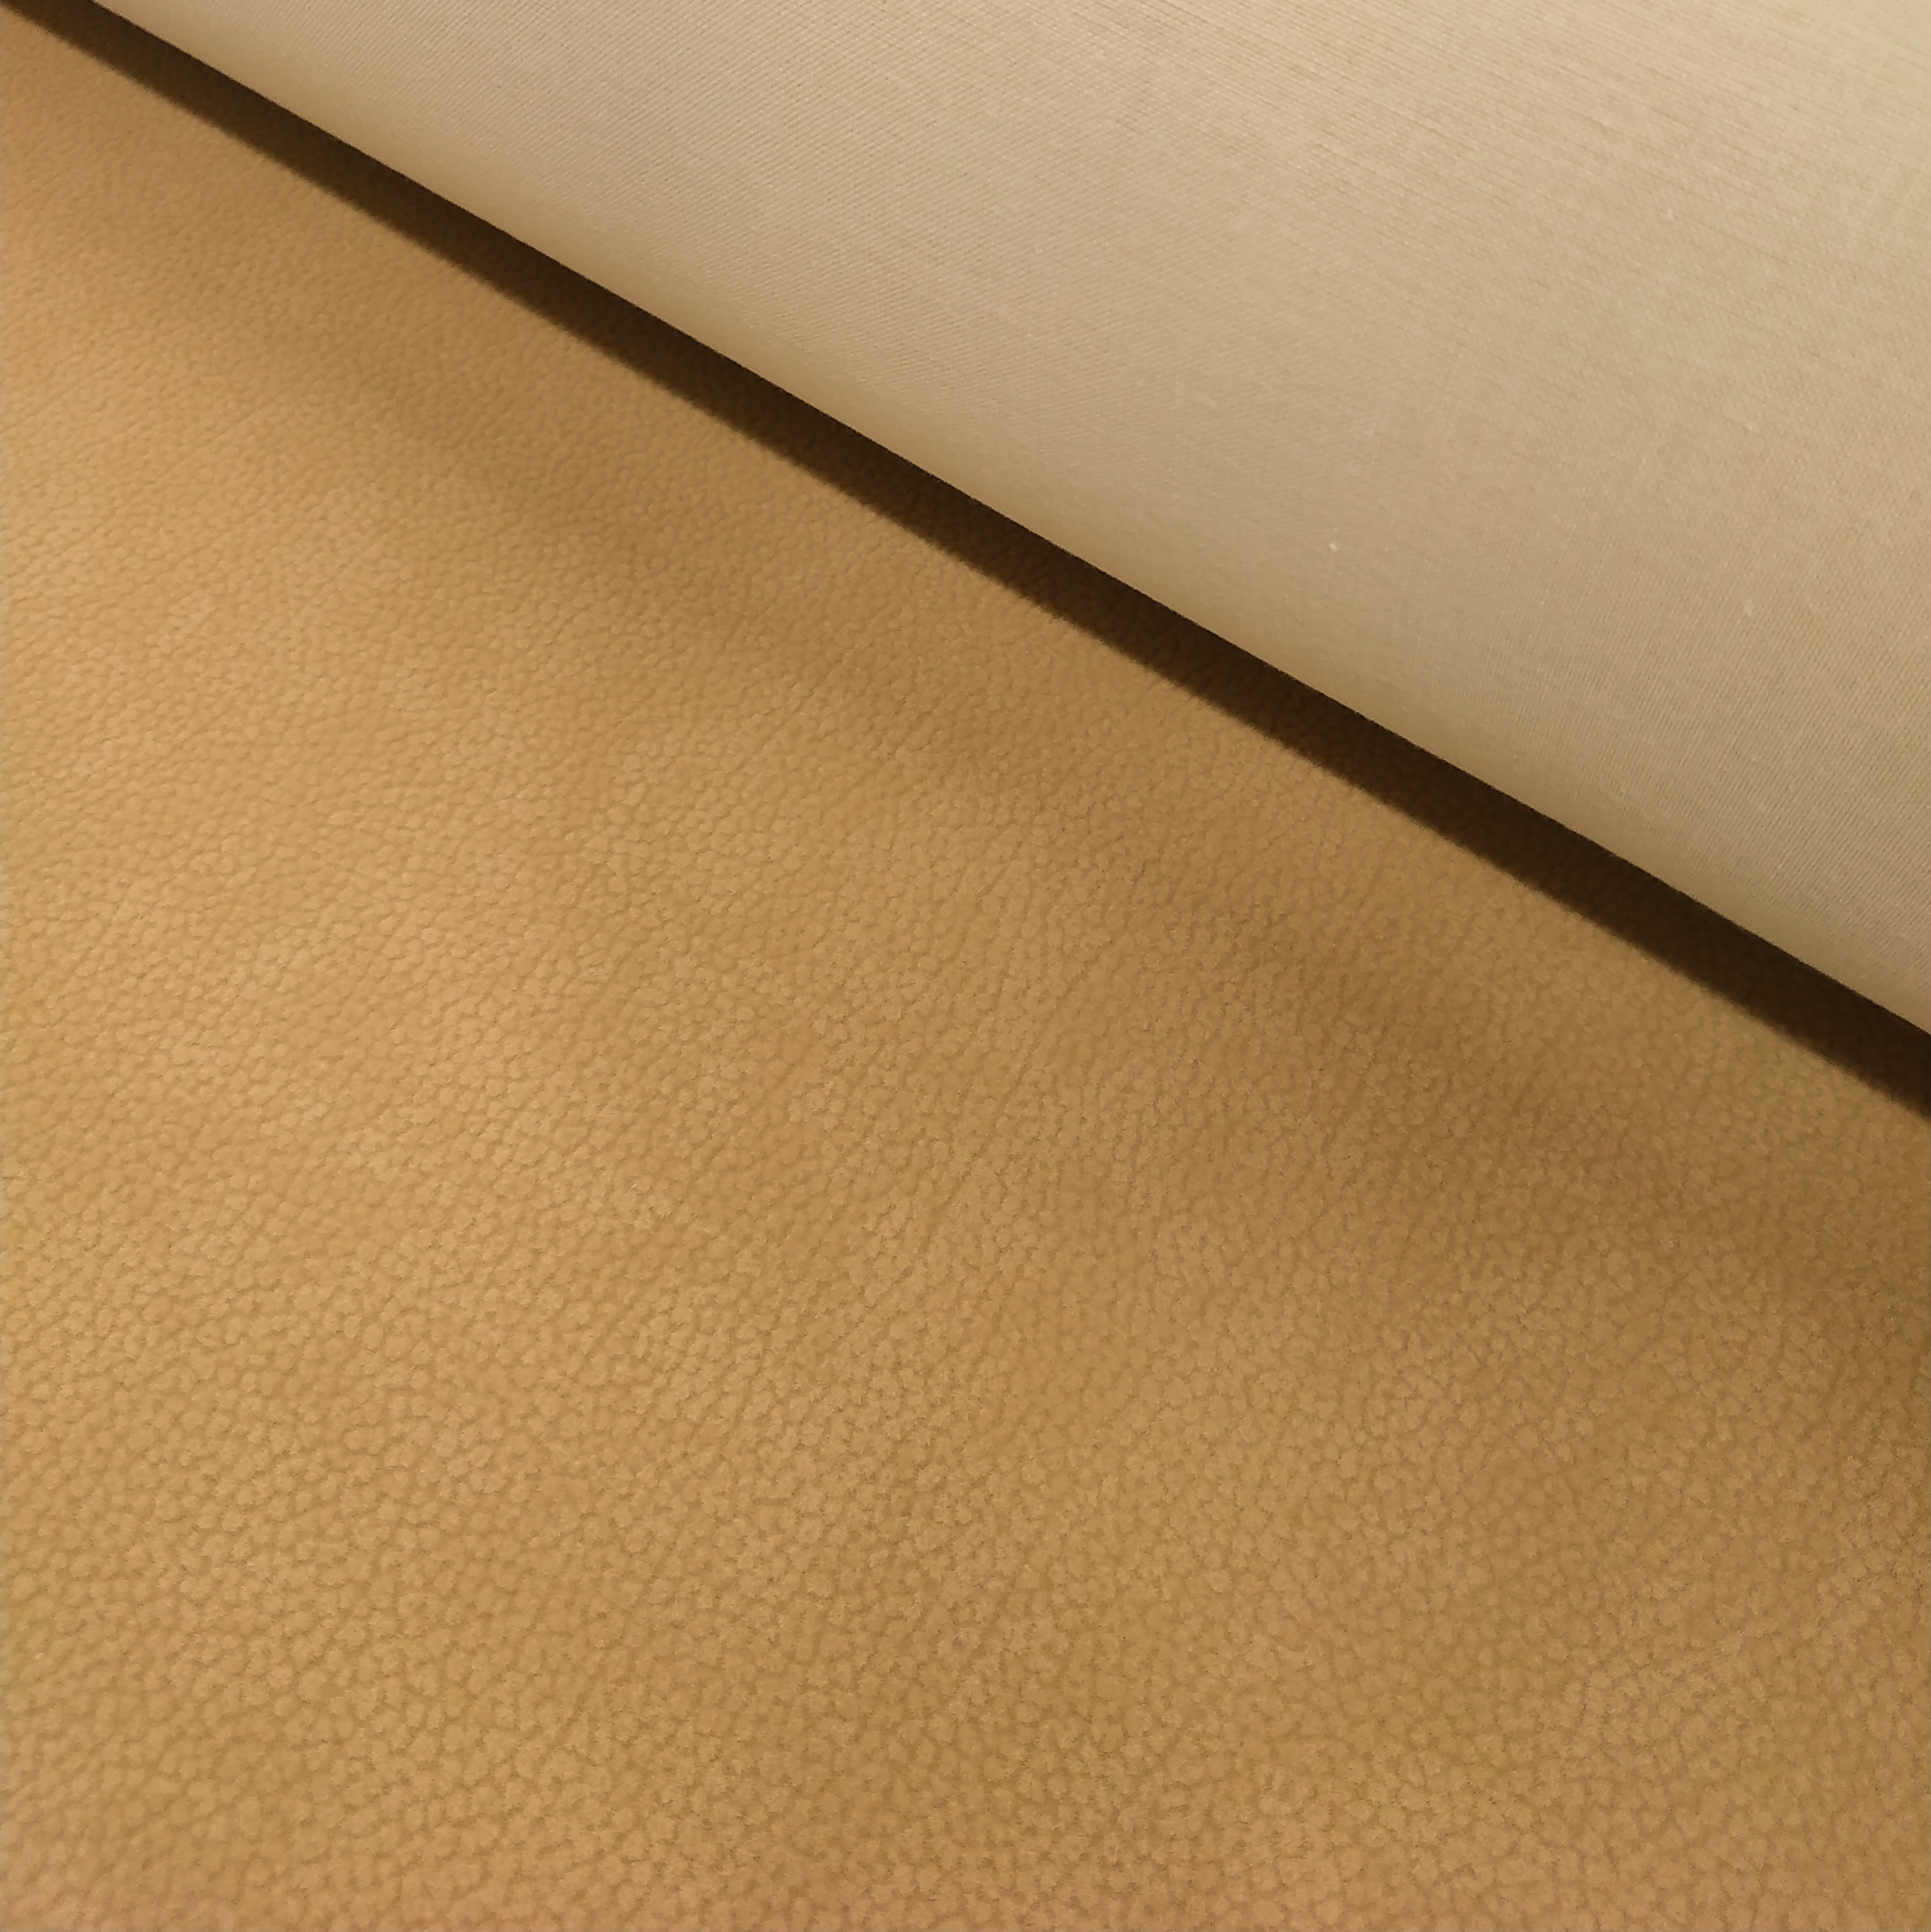 Upholstery fabric Pavos - beige/camel